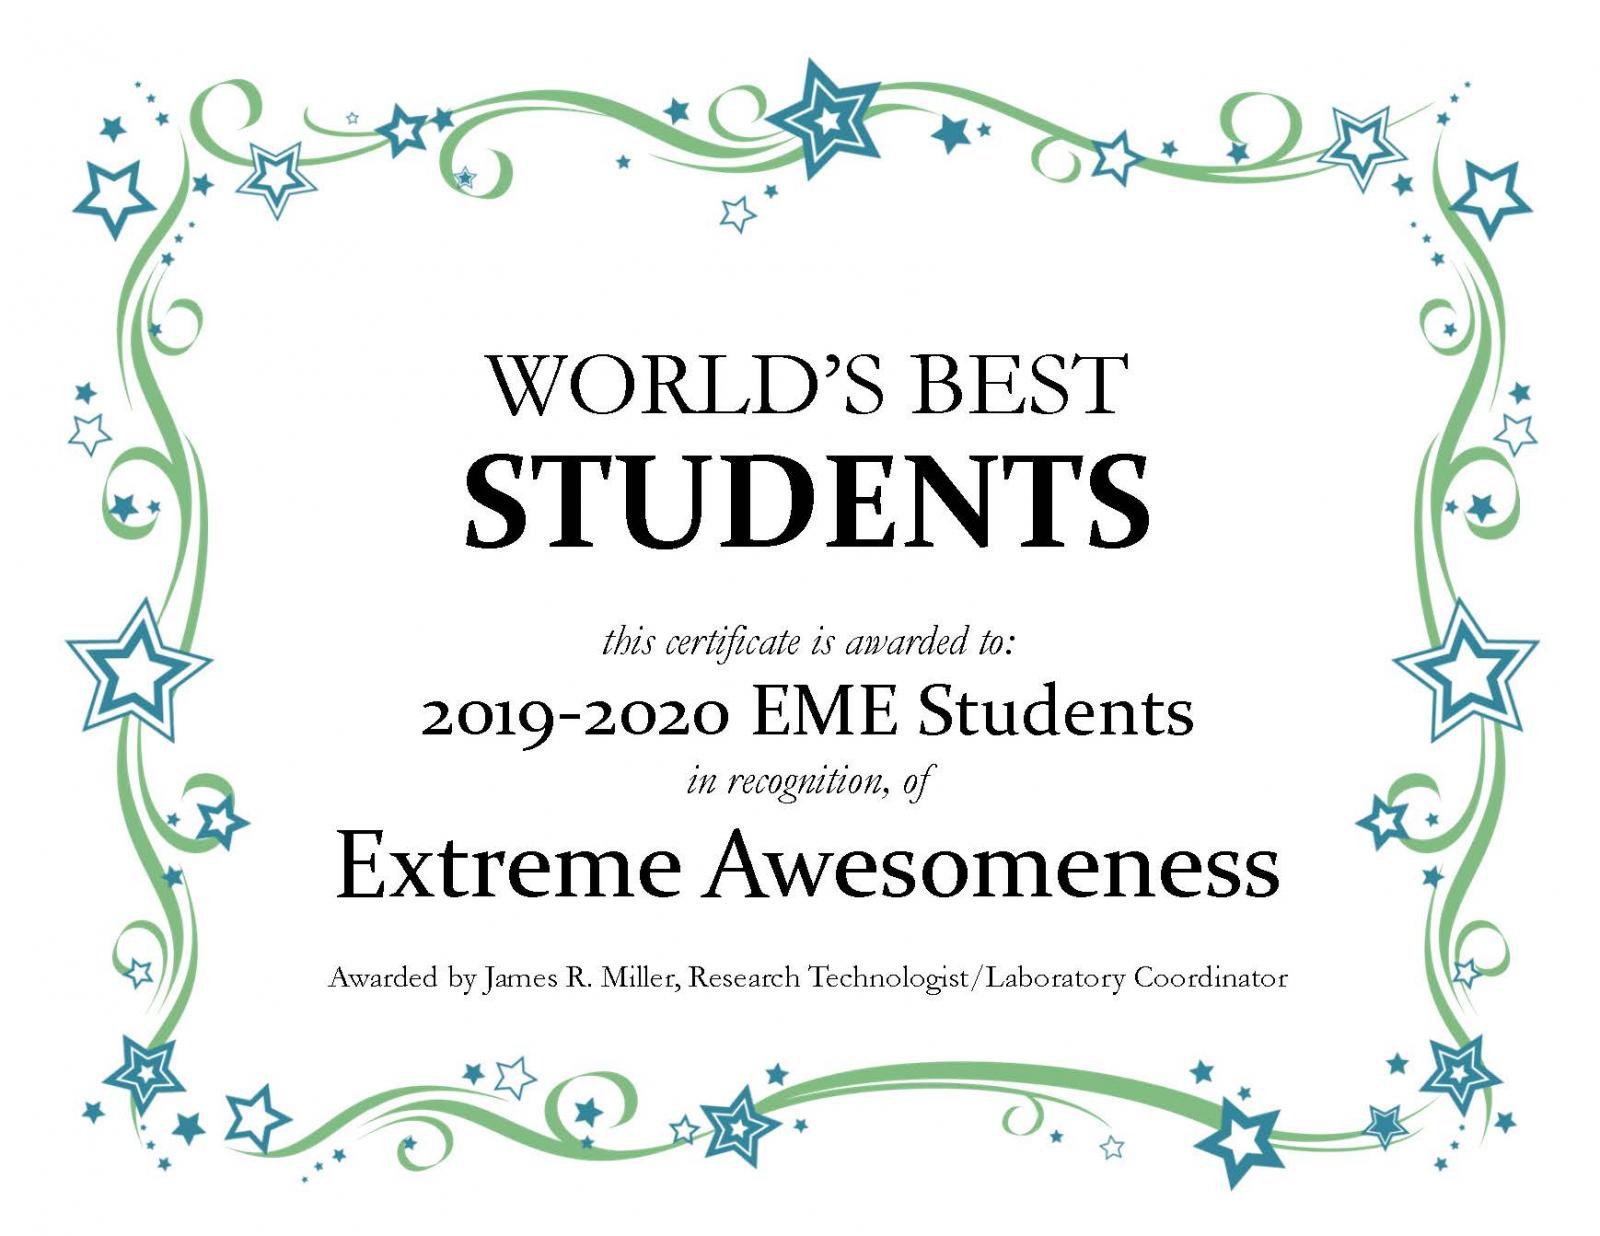 Certificate of Awesomeness for EME Students